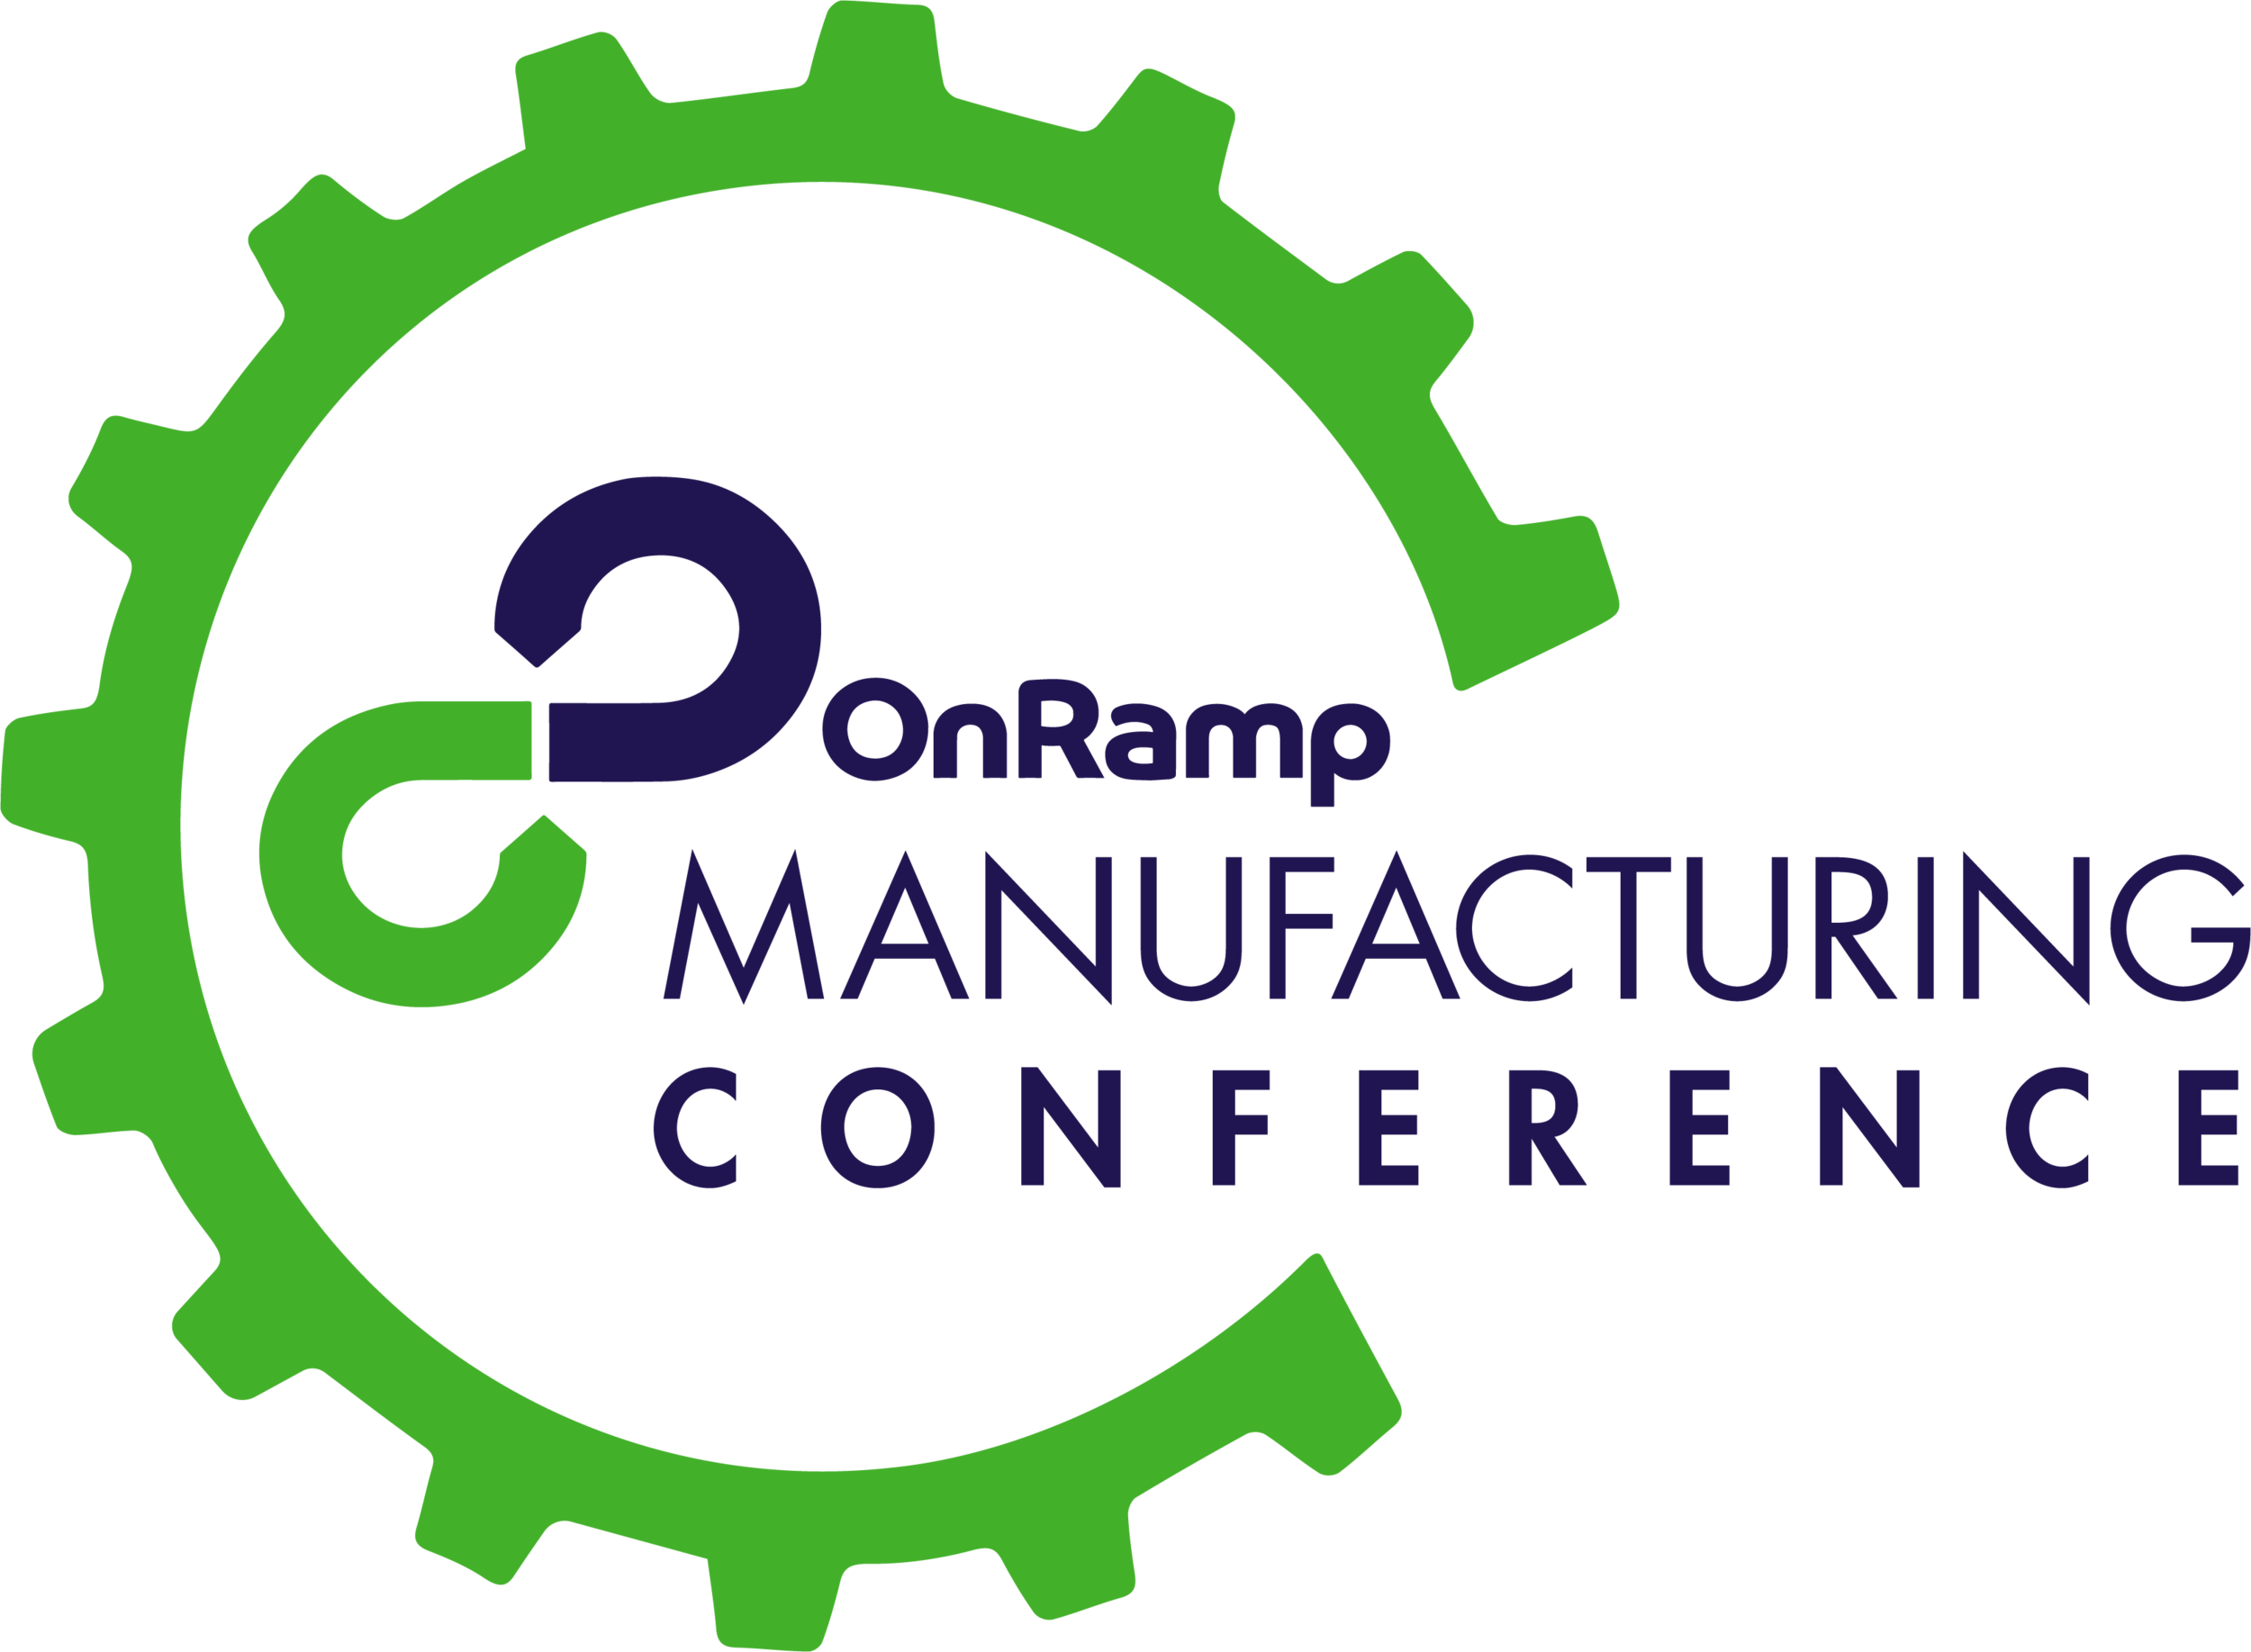 OnRamp Manufacturing Conference